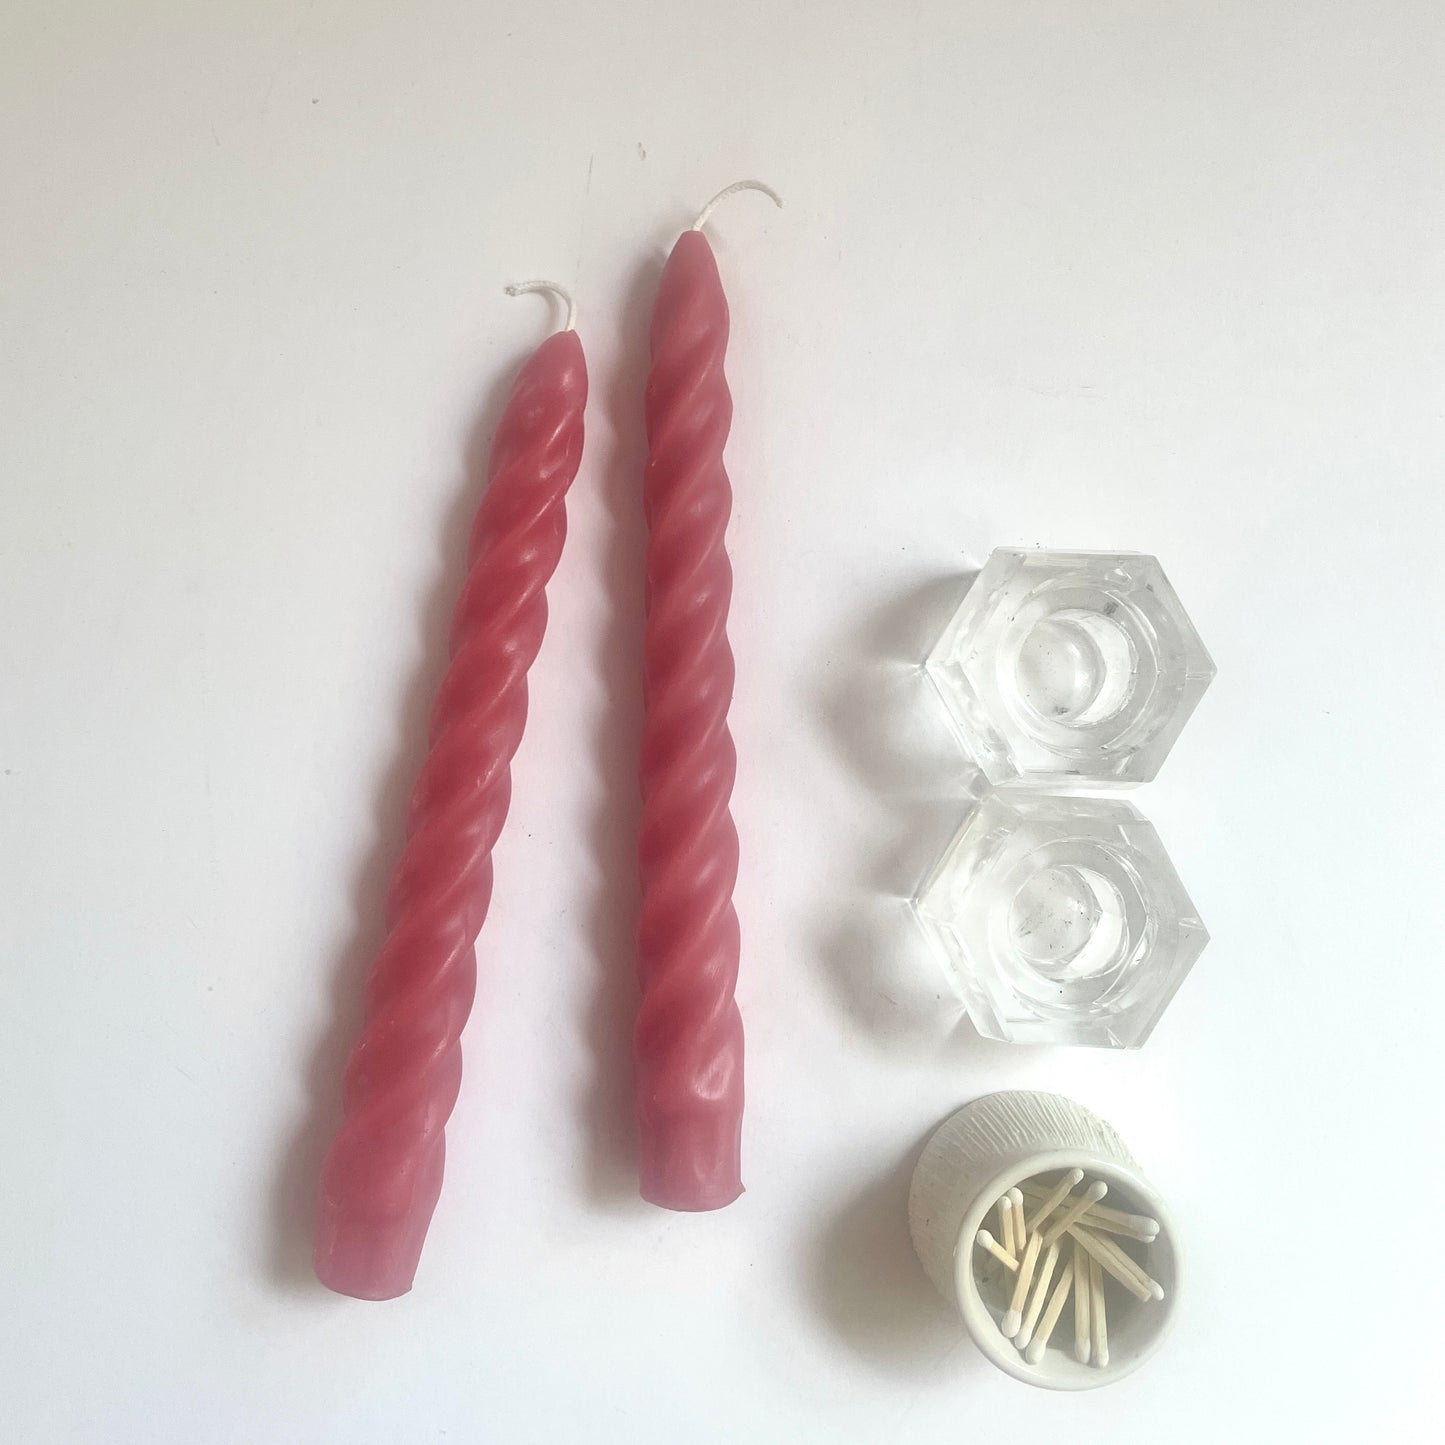 Pink Beeswax Candles - PAIR of 2 Taper Candles 8" - Hygge Home - Beeswax Tapers - Candles - Beeswax Candles, Tapers, Pink